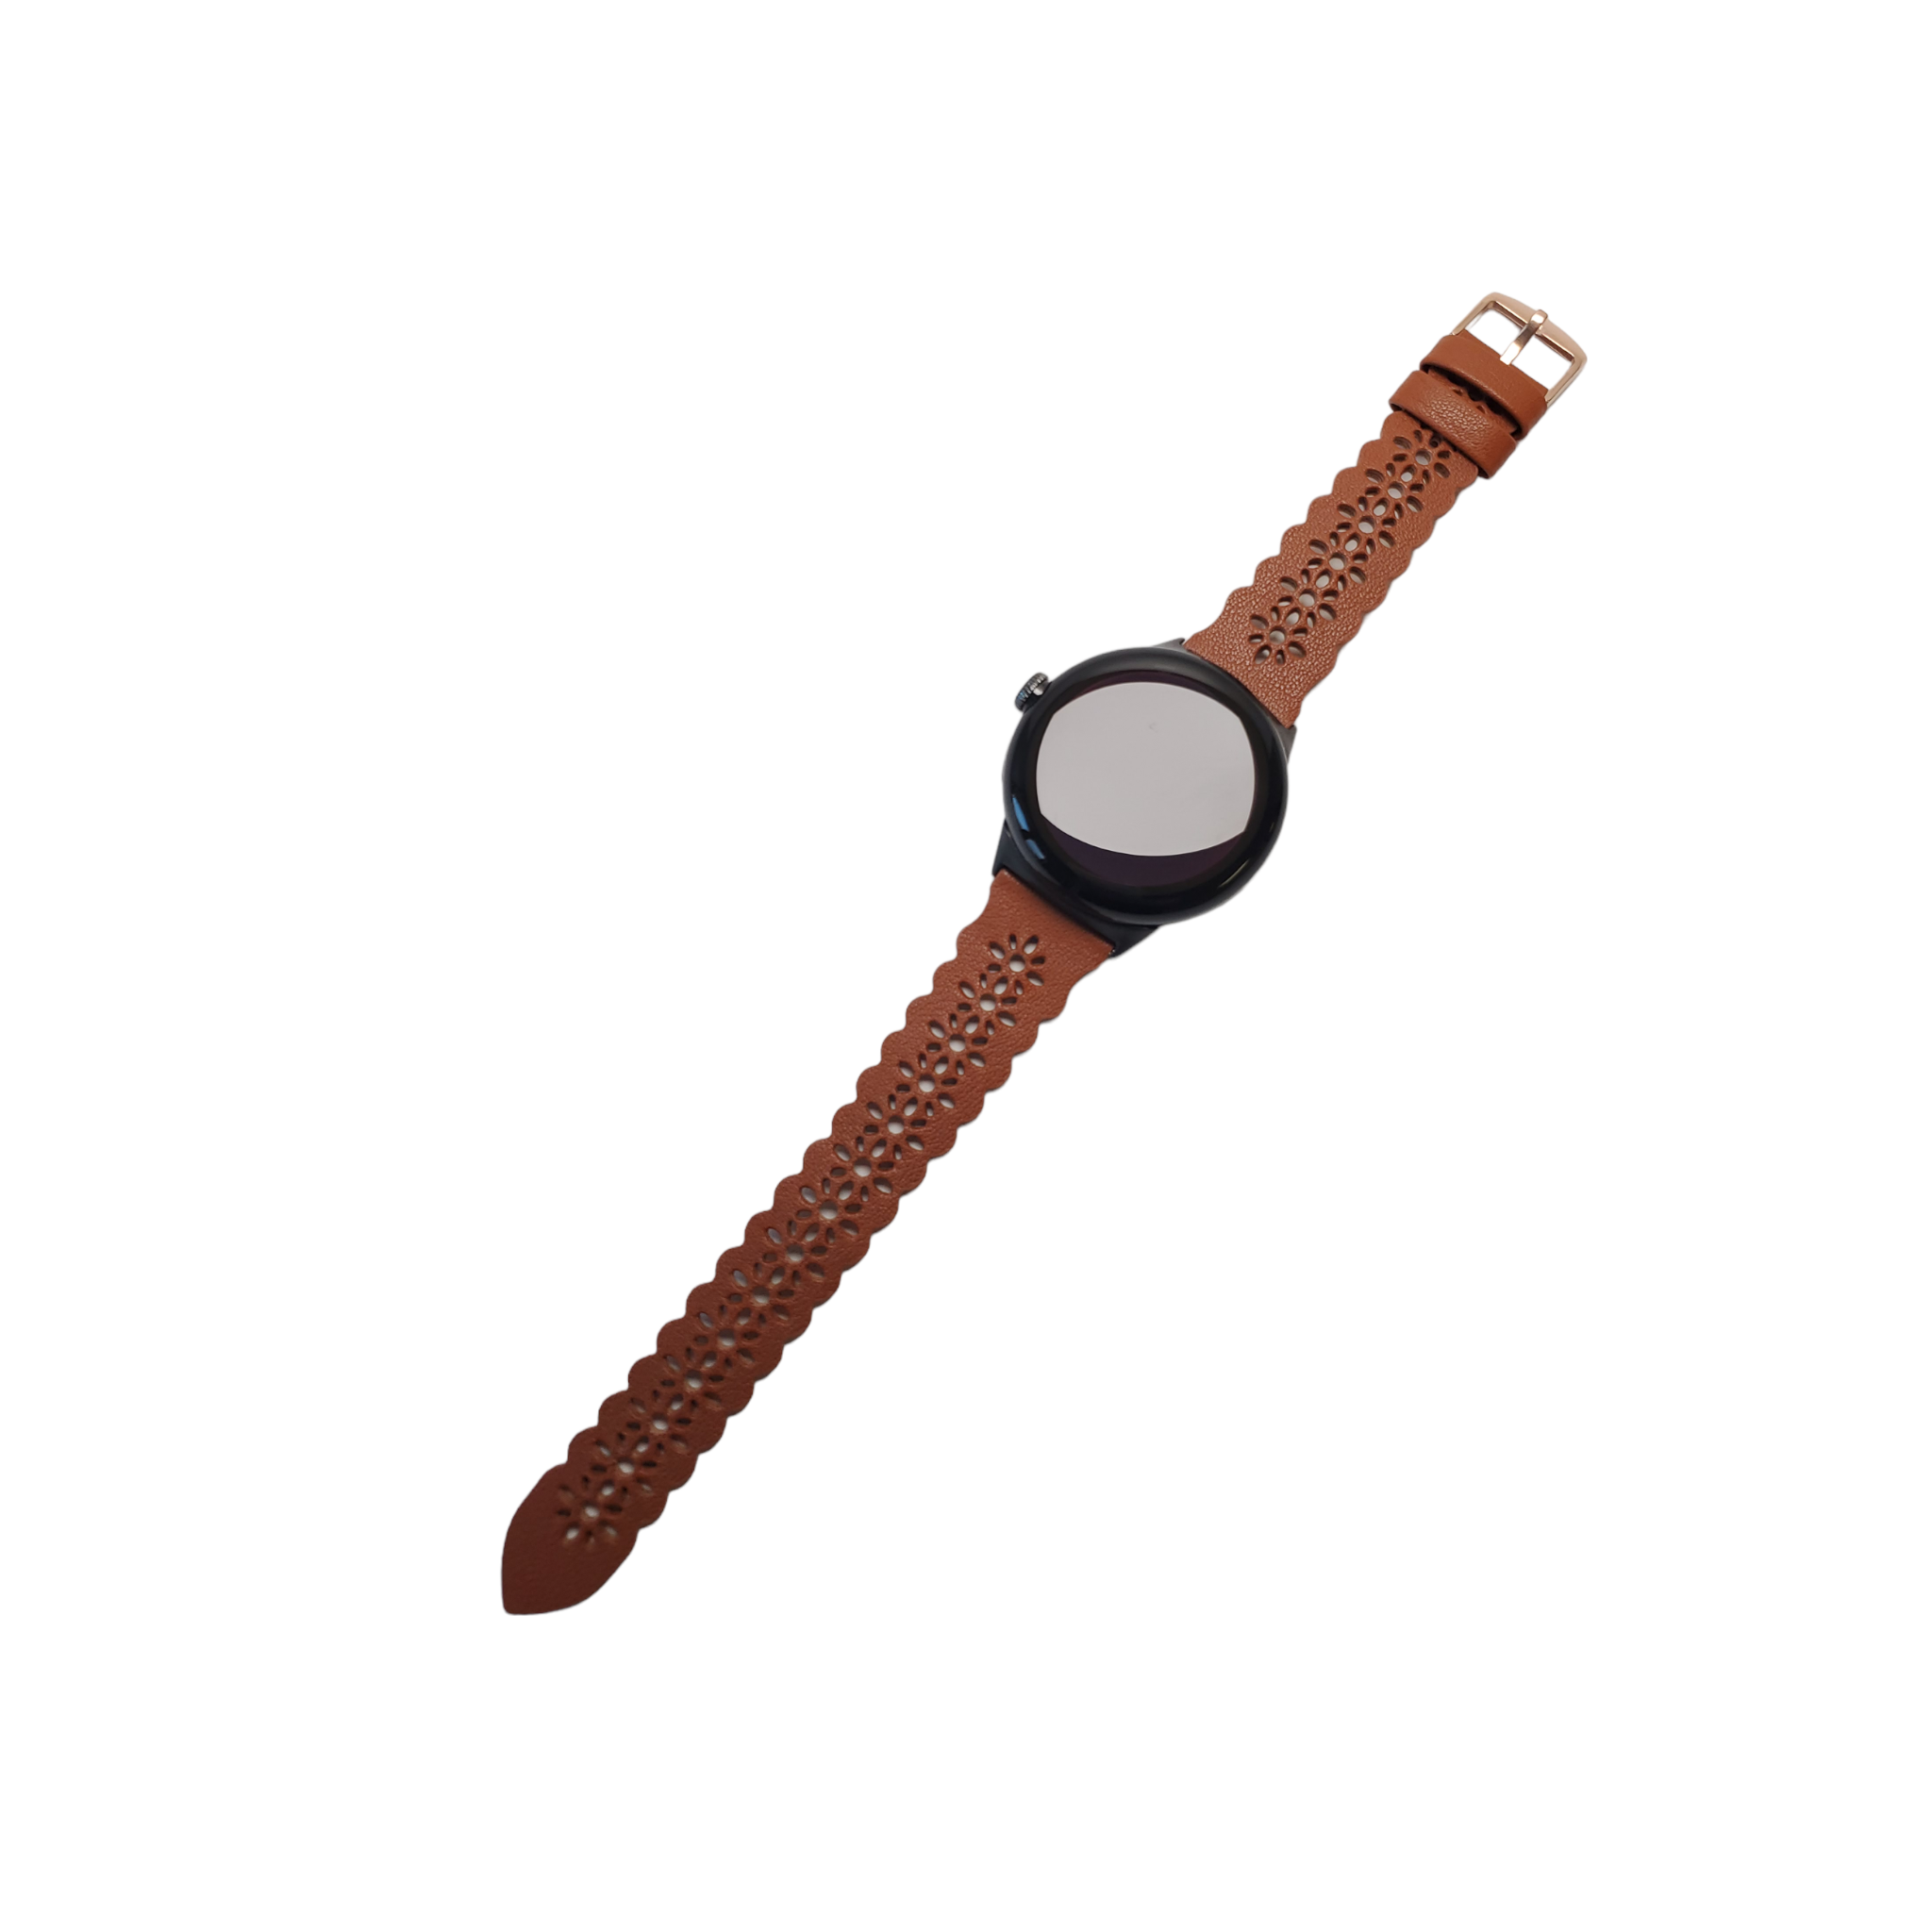 Lace Leather Bracelet Watch Band for Google Pixel